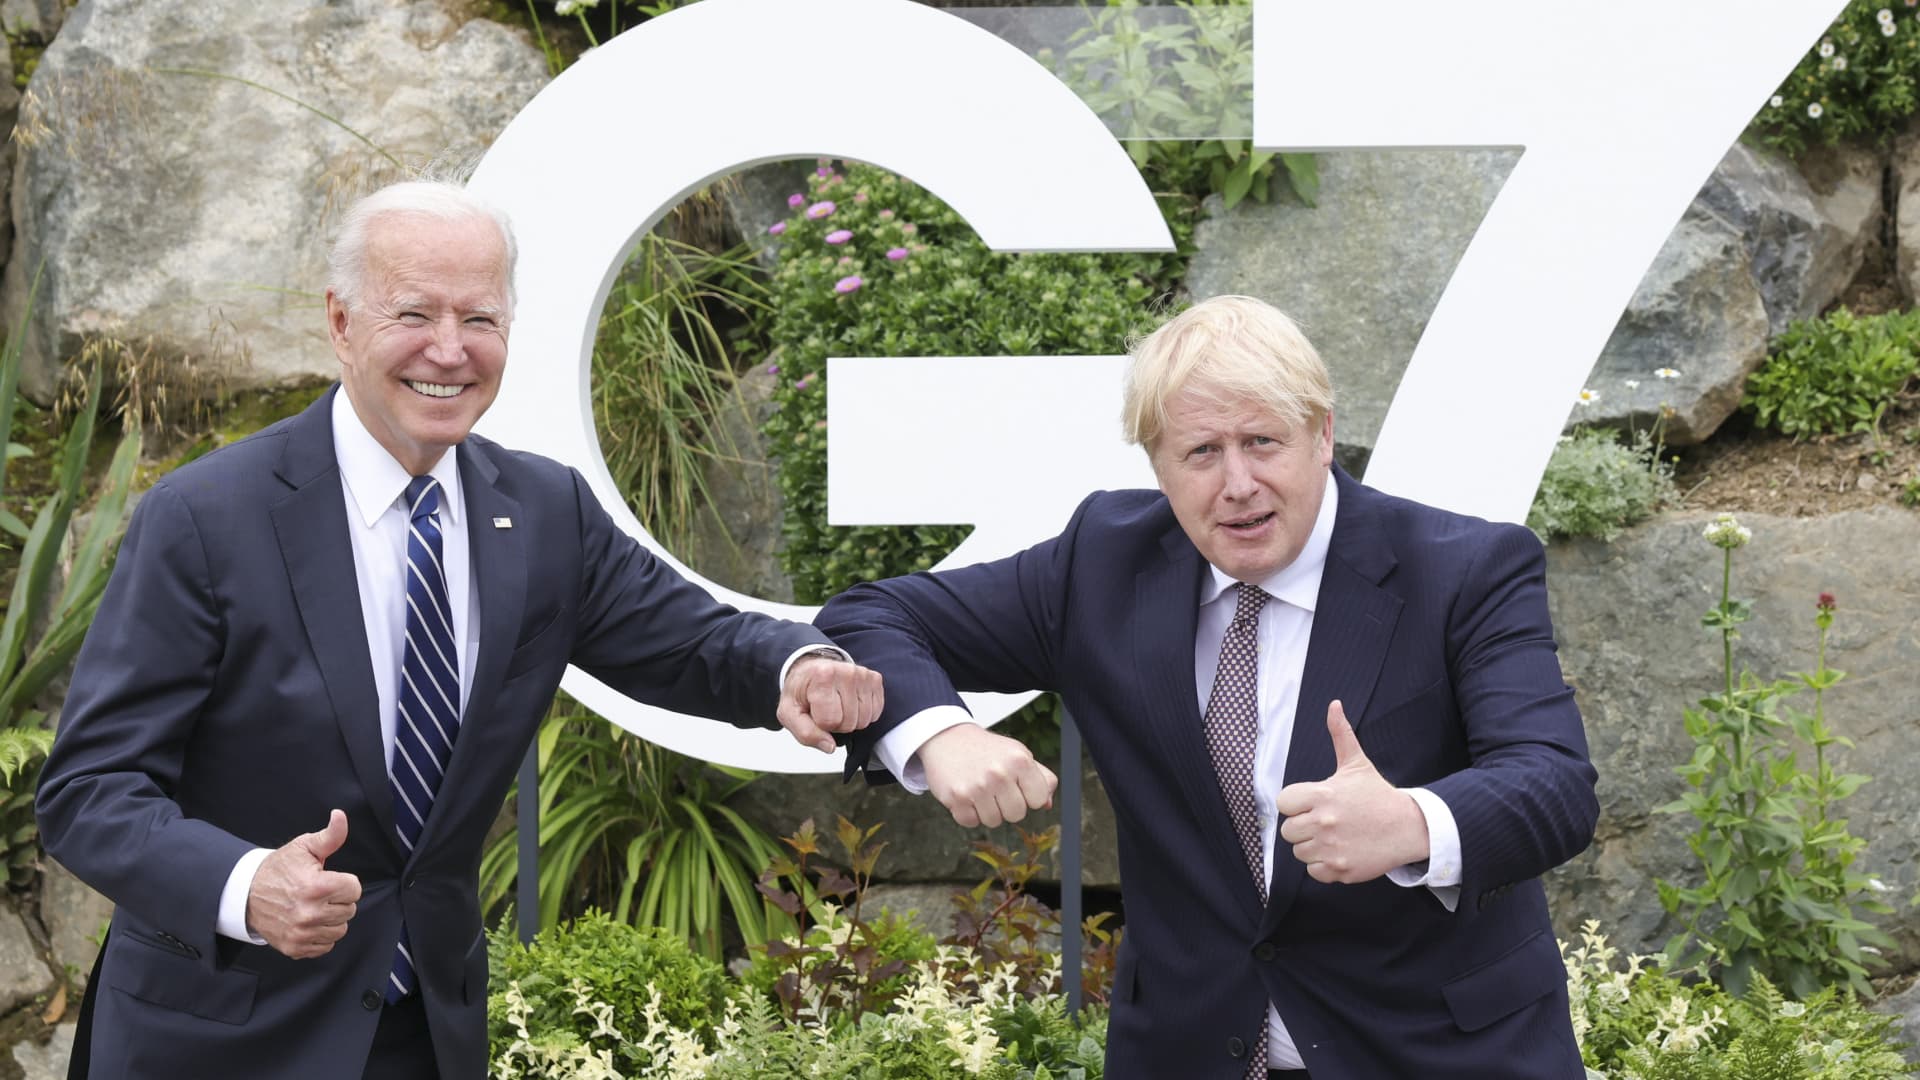 The Prime Minister Boris Johnson and the US President Joe Biden in Carbis Bay Cornwall after their meeting ahead of the G7 Summit June 10, 2021.